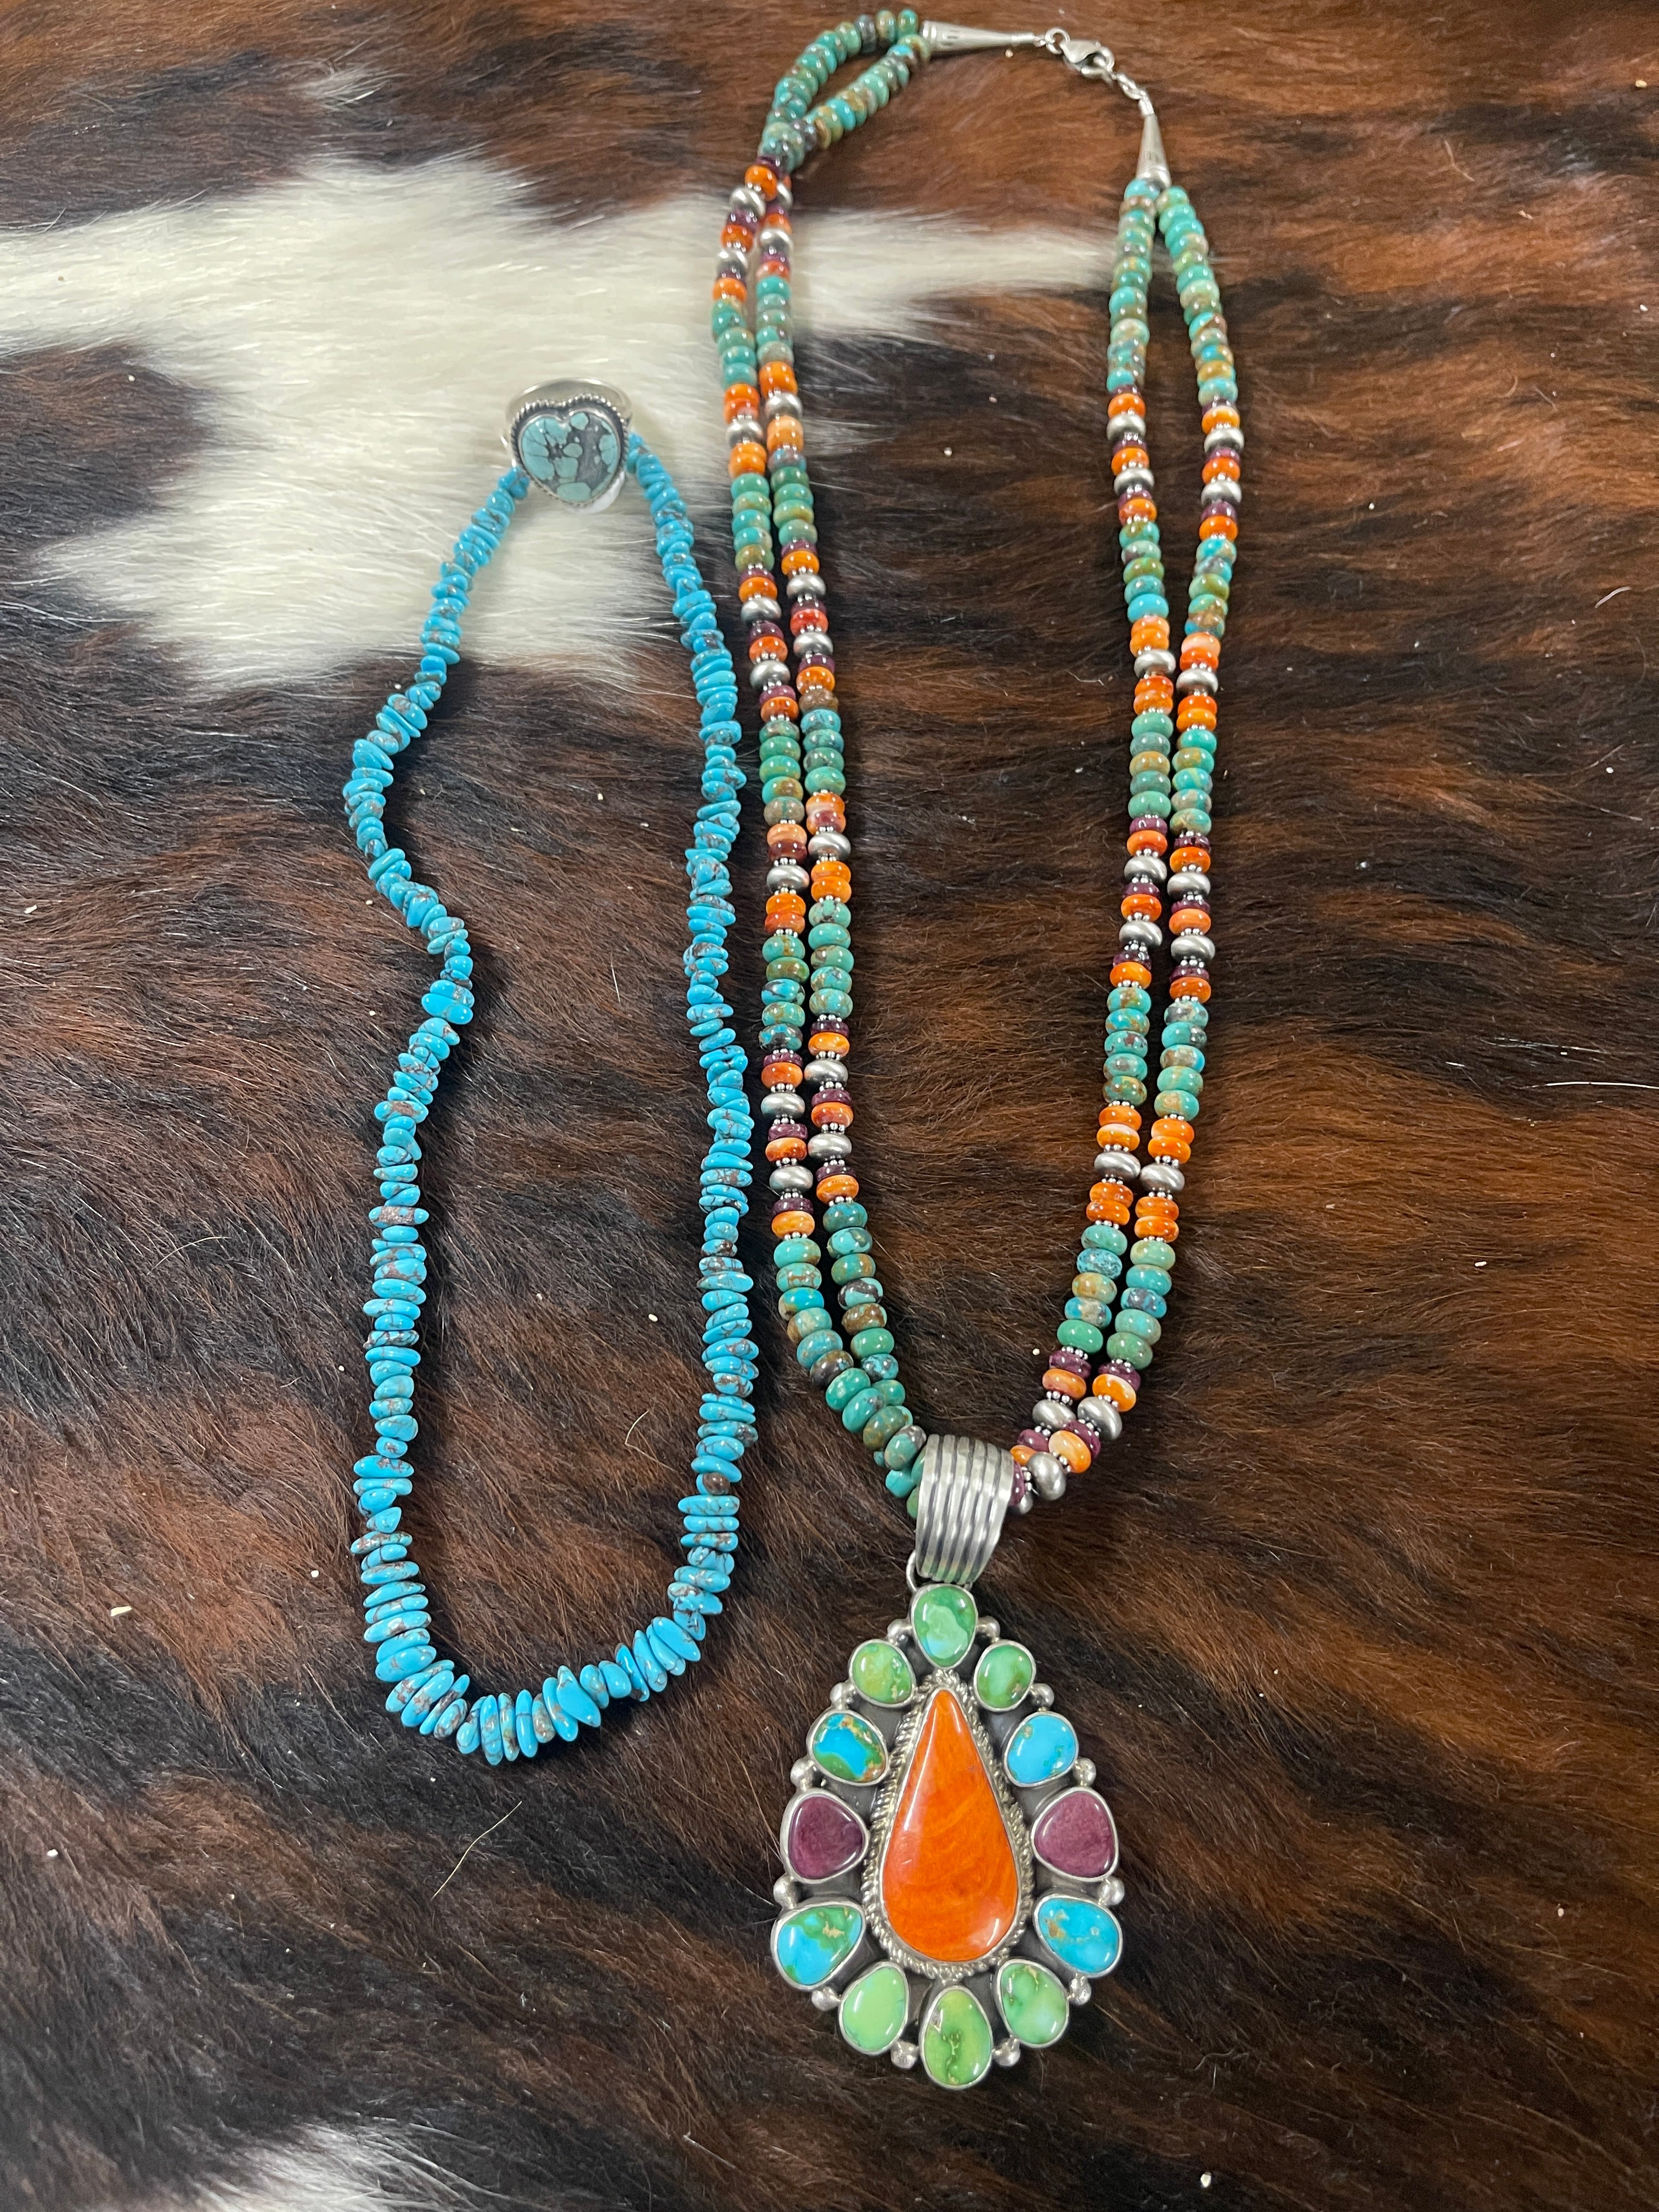 Shirley Henry Multi Stone Necklace, Tony Skeets New Lander Ring, Navajo Strung Egyptian Turquoise Necklace